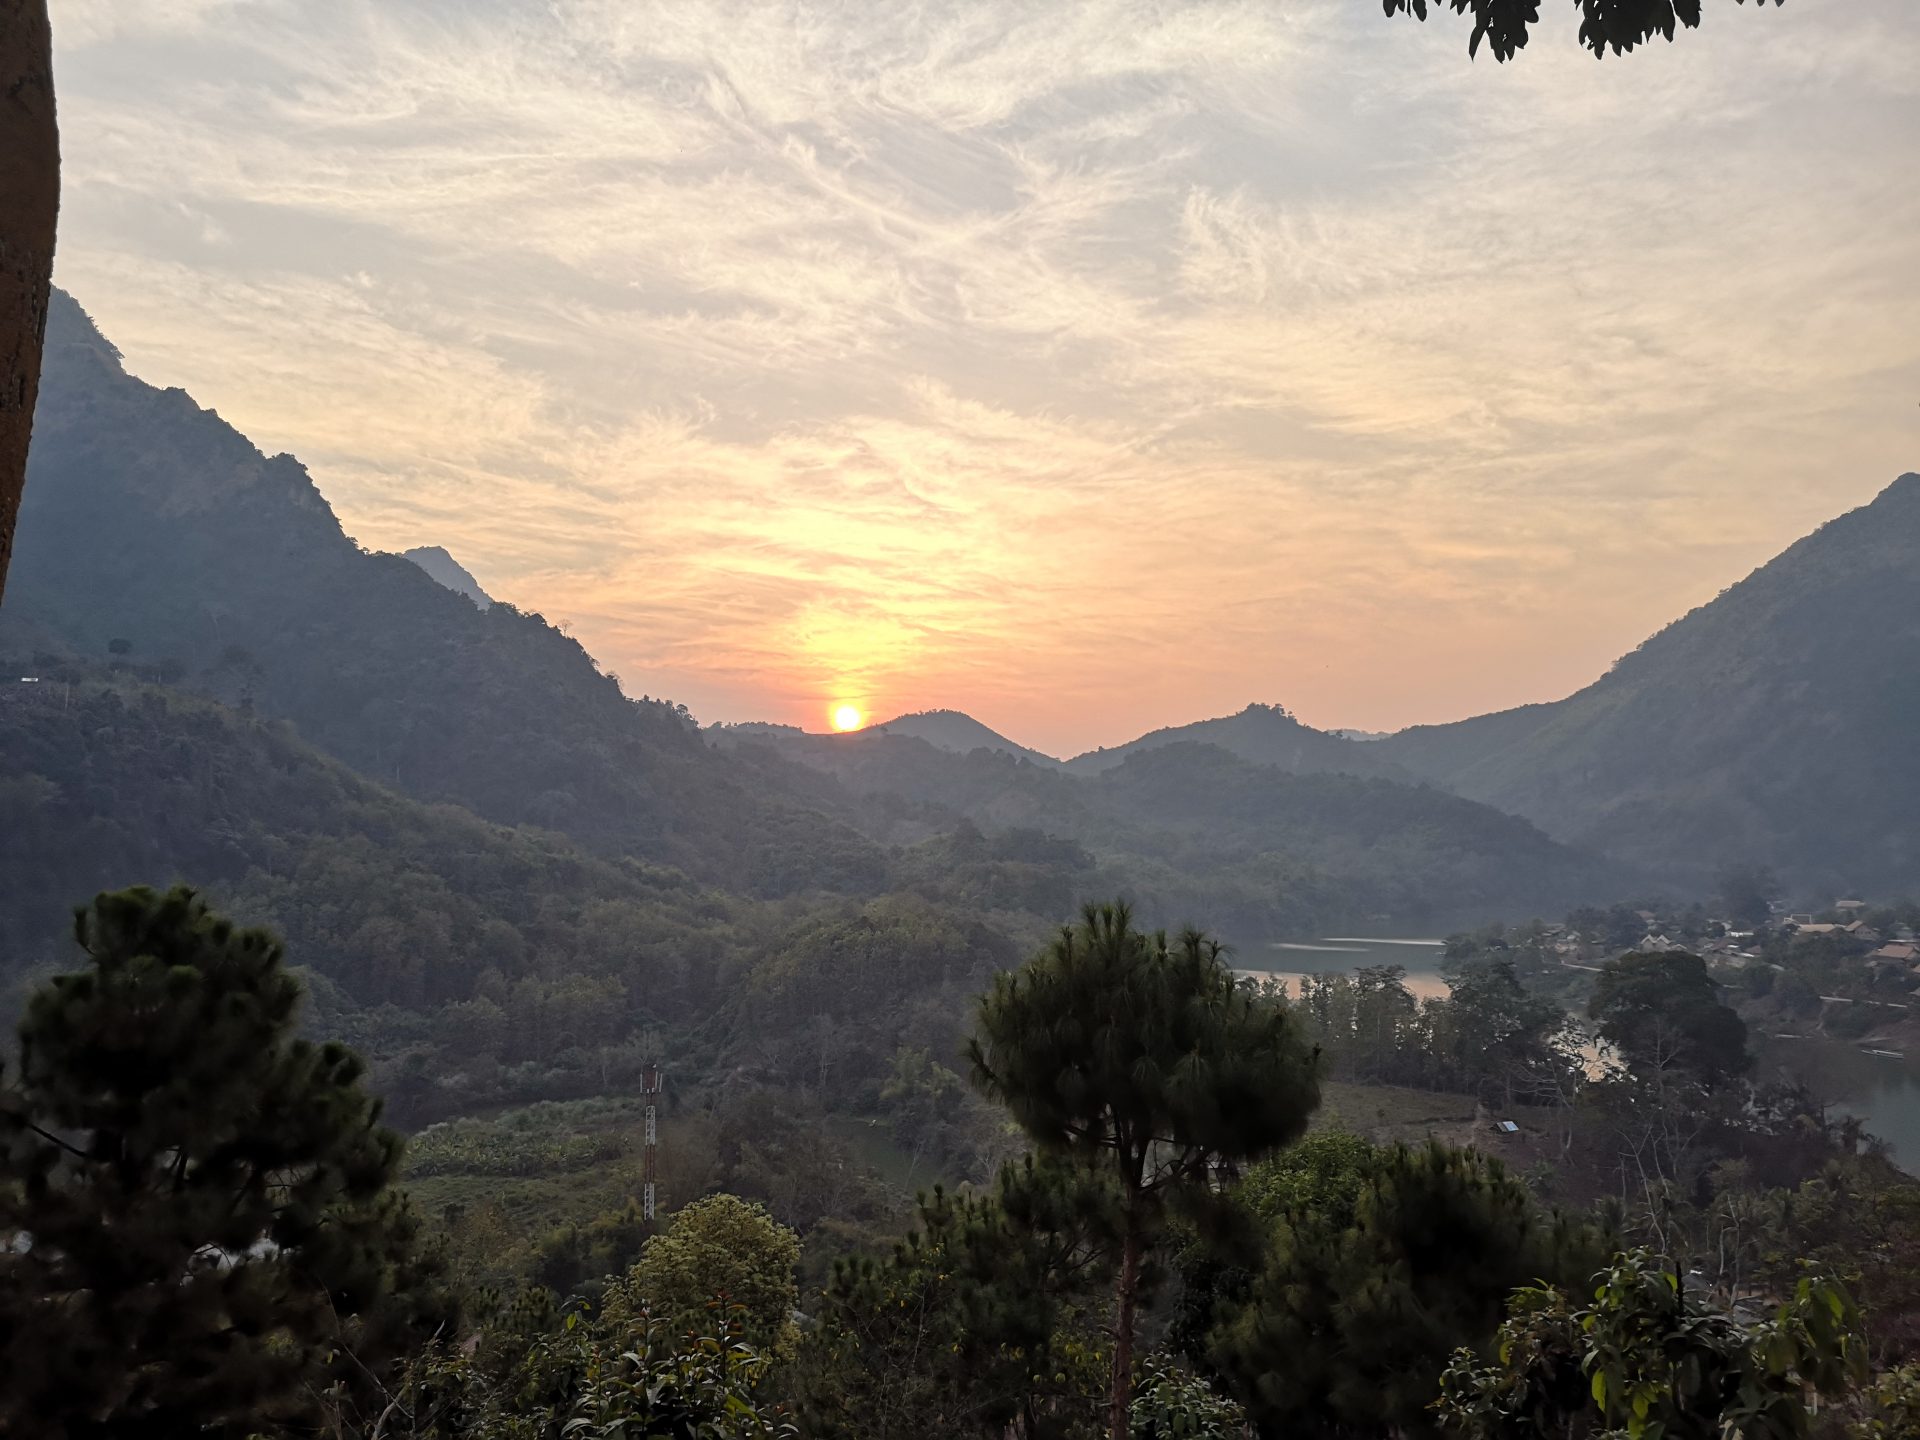 Nong Khiaw in Northern Laos